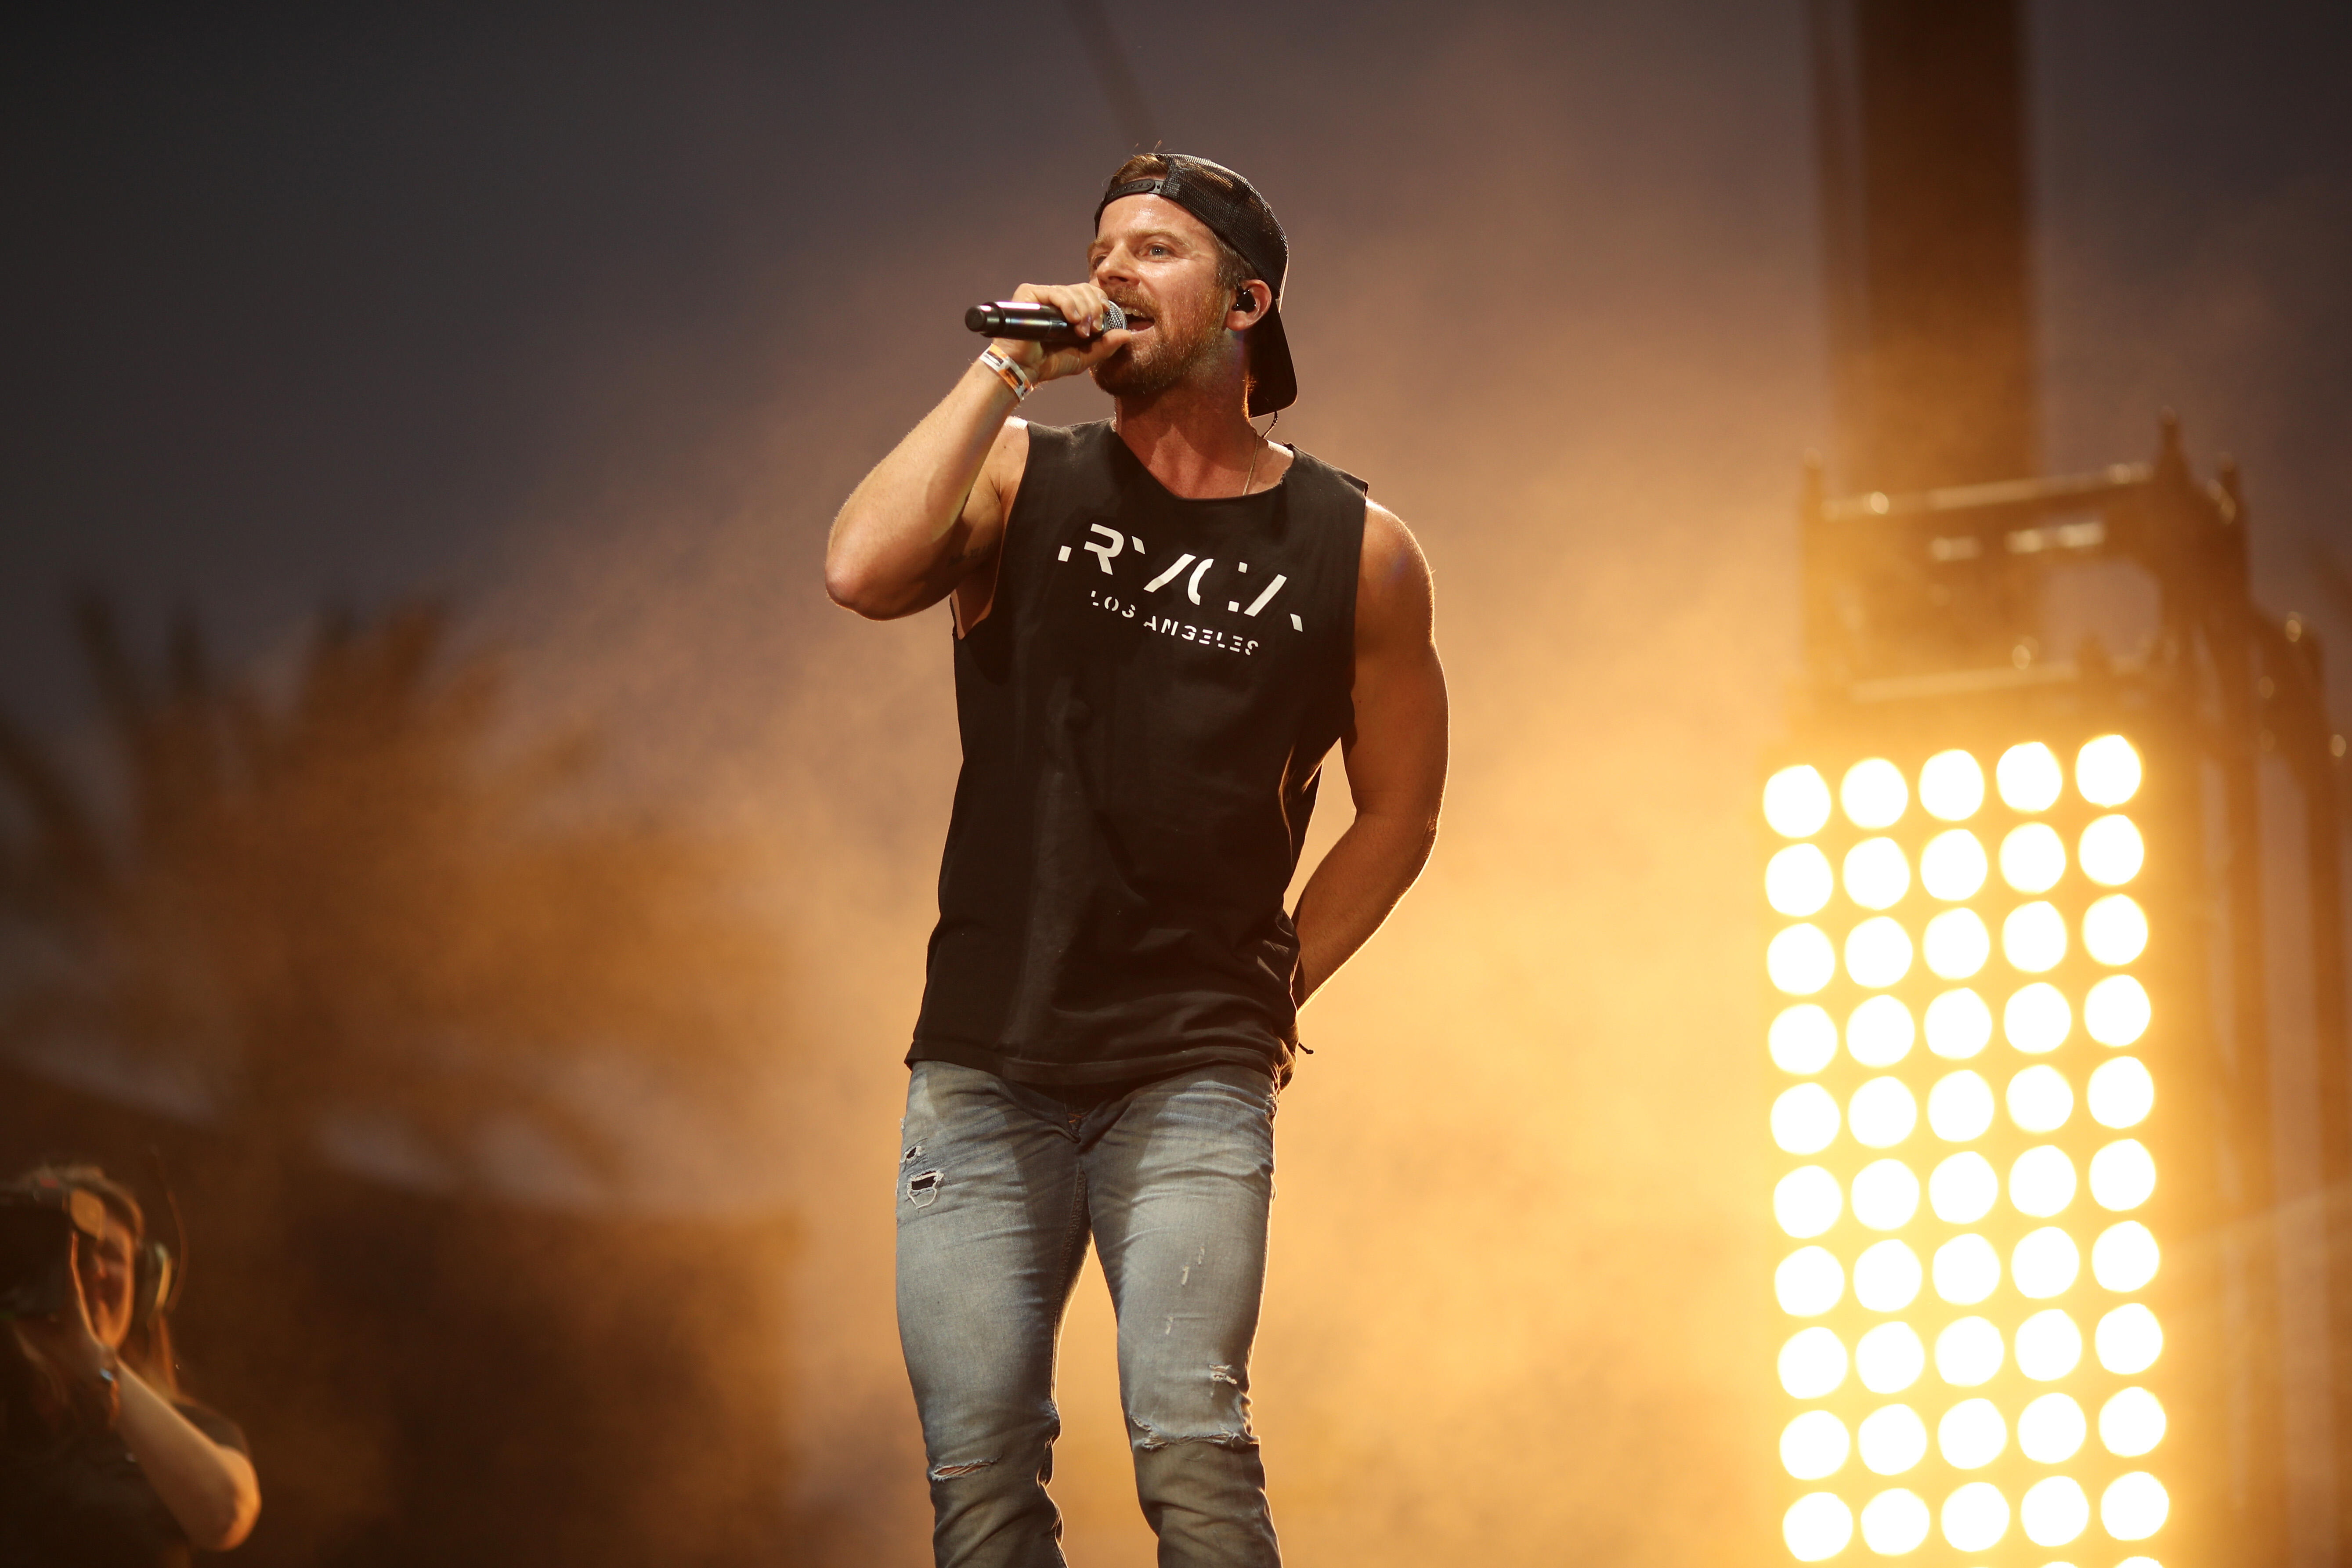 INDIO, CA - APRIL 29:  Musician Kip Moore performs on the Toyota Mane Stage during day 2 of 2017 Stagecoach California's Country Music Festival at the Empire Polo Club on April 29, 2017 in Indio, California.  (Photo by Christopher Polk/Getty Images for St